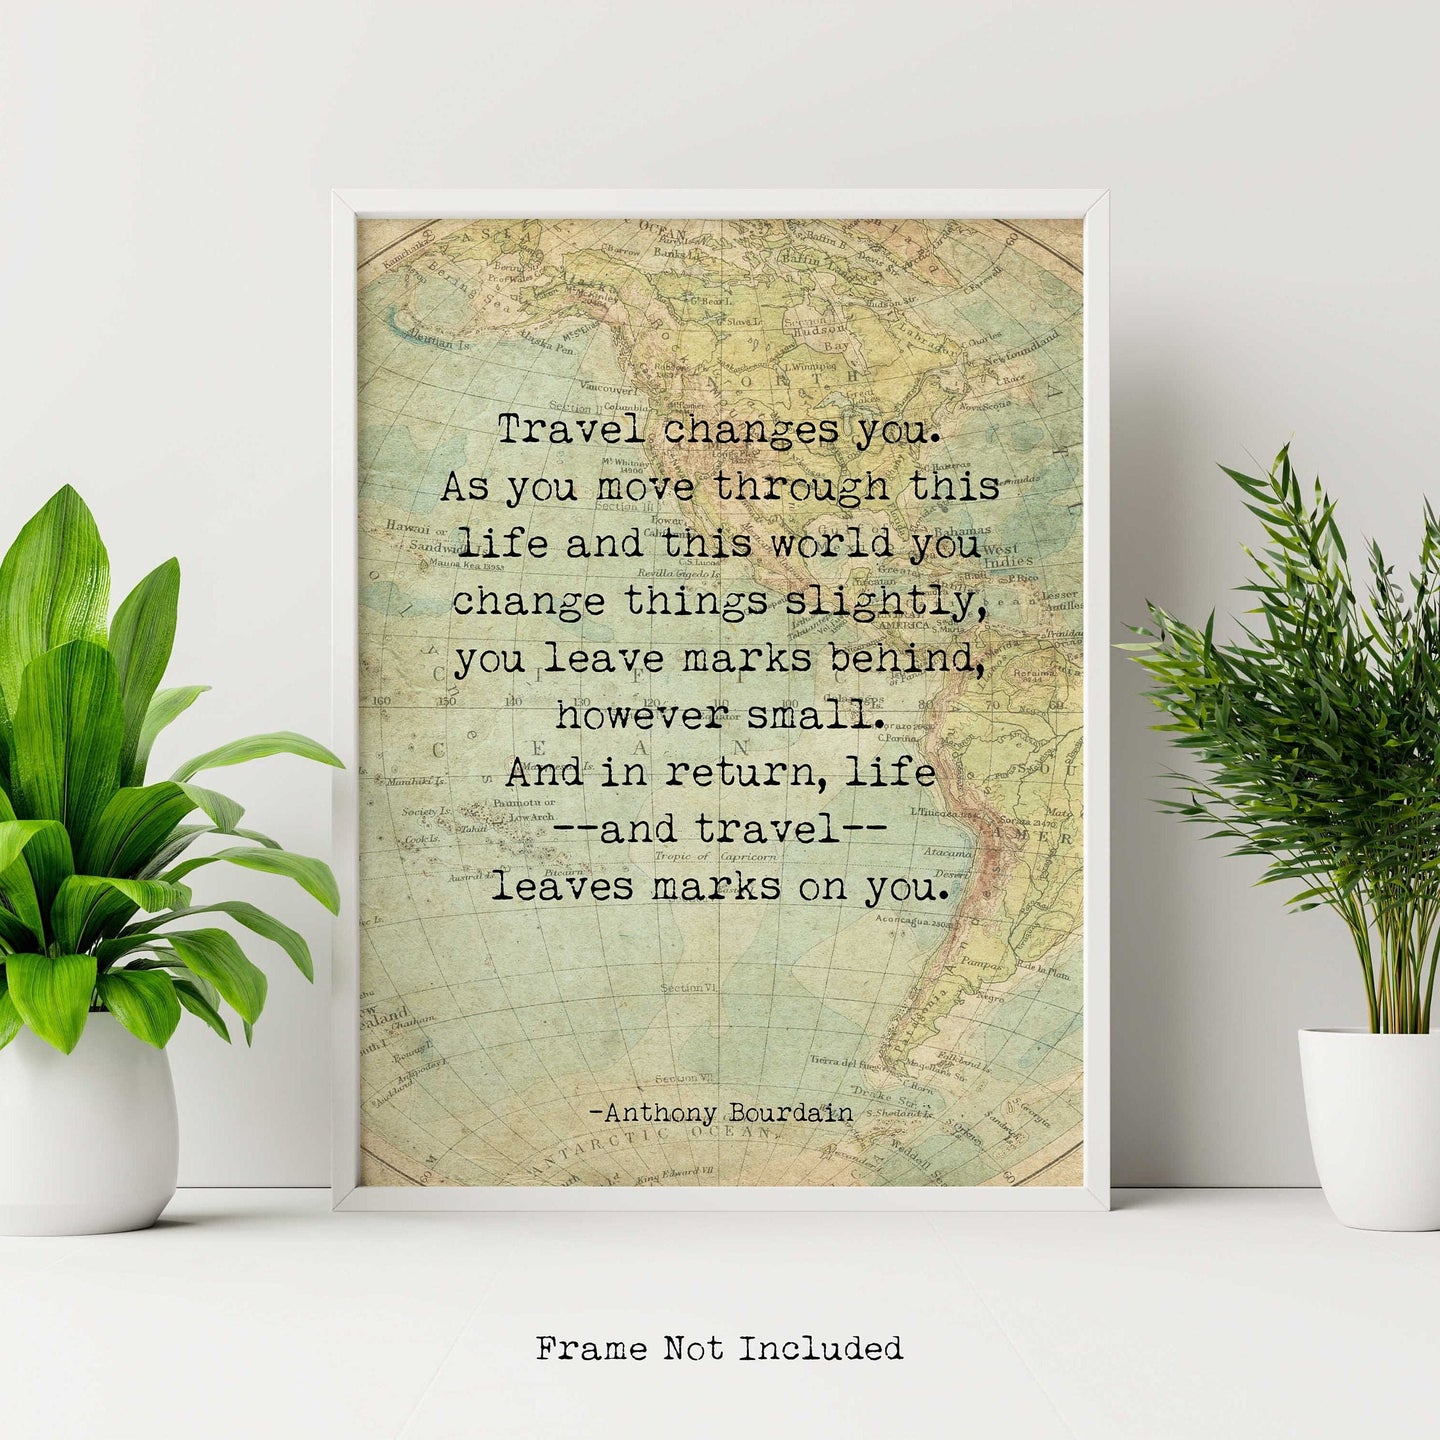 Anthony Bourdain Print - Travel changes you - Travel Quote UNFRAMED Travel Wall Art